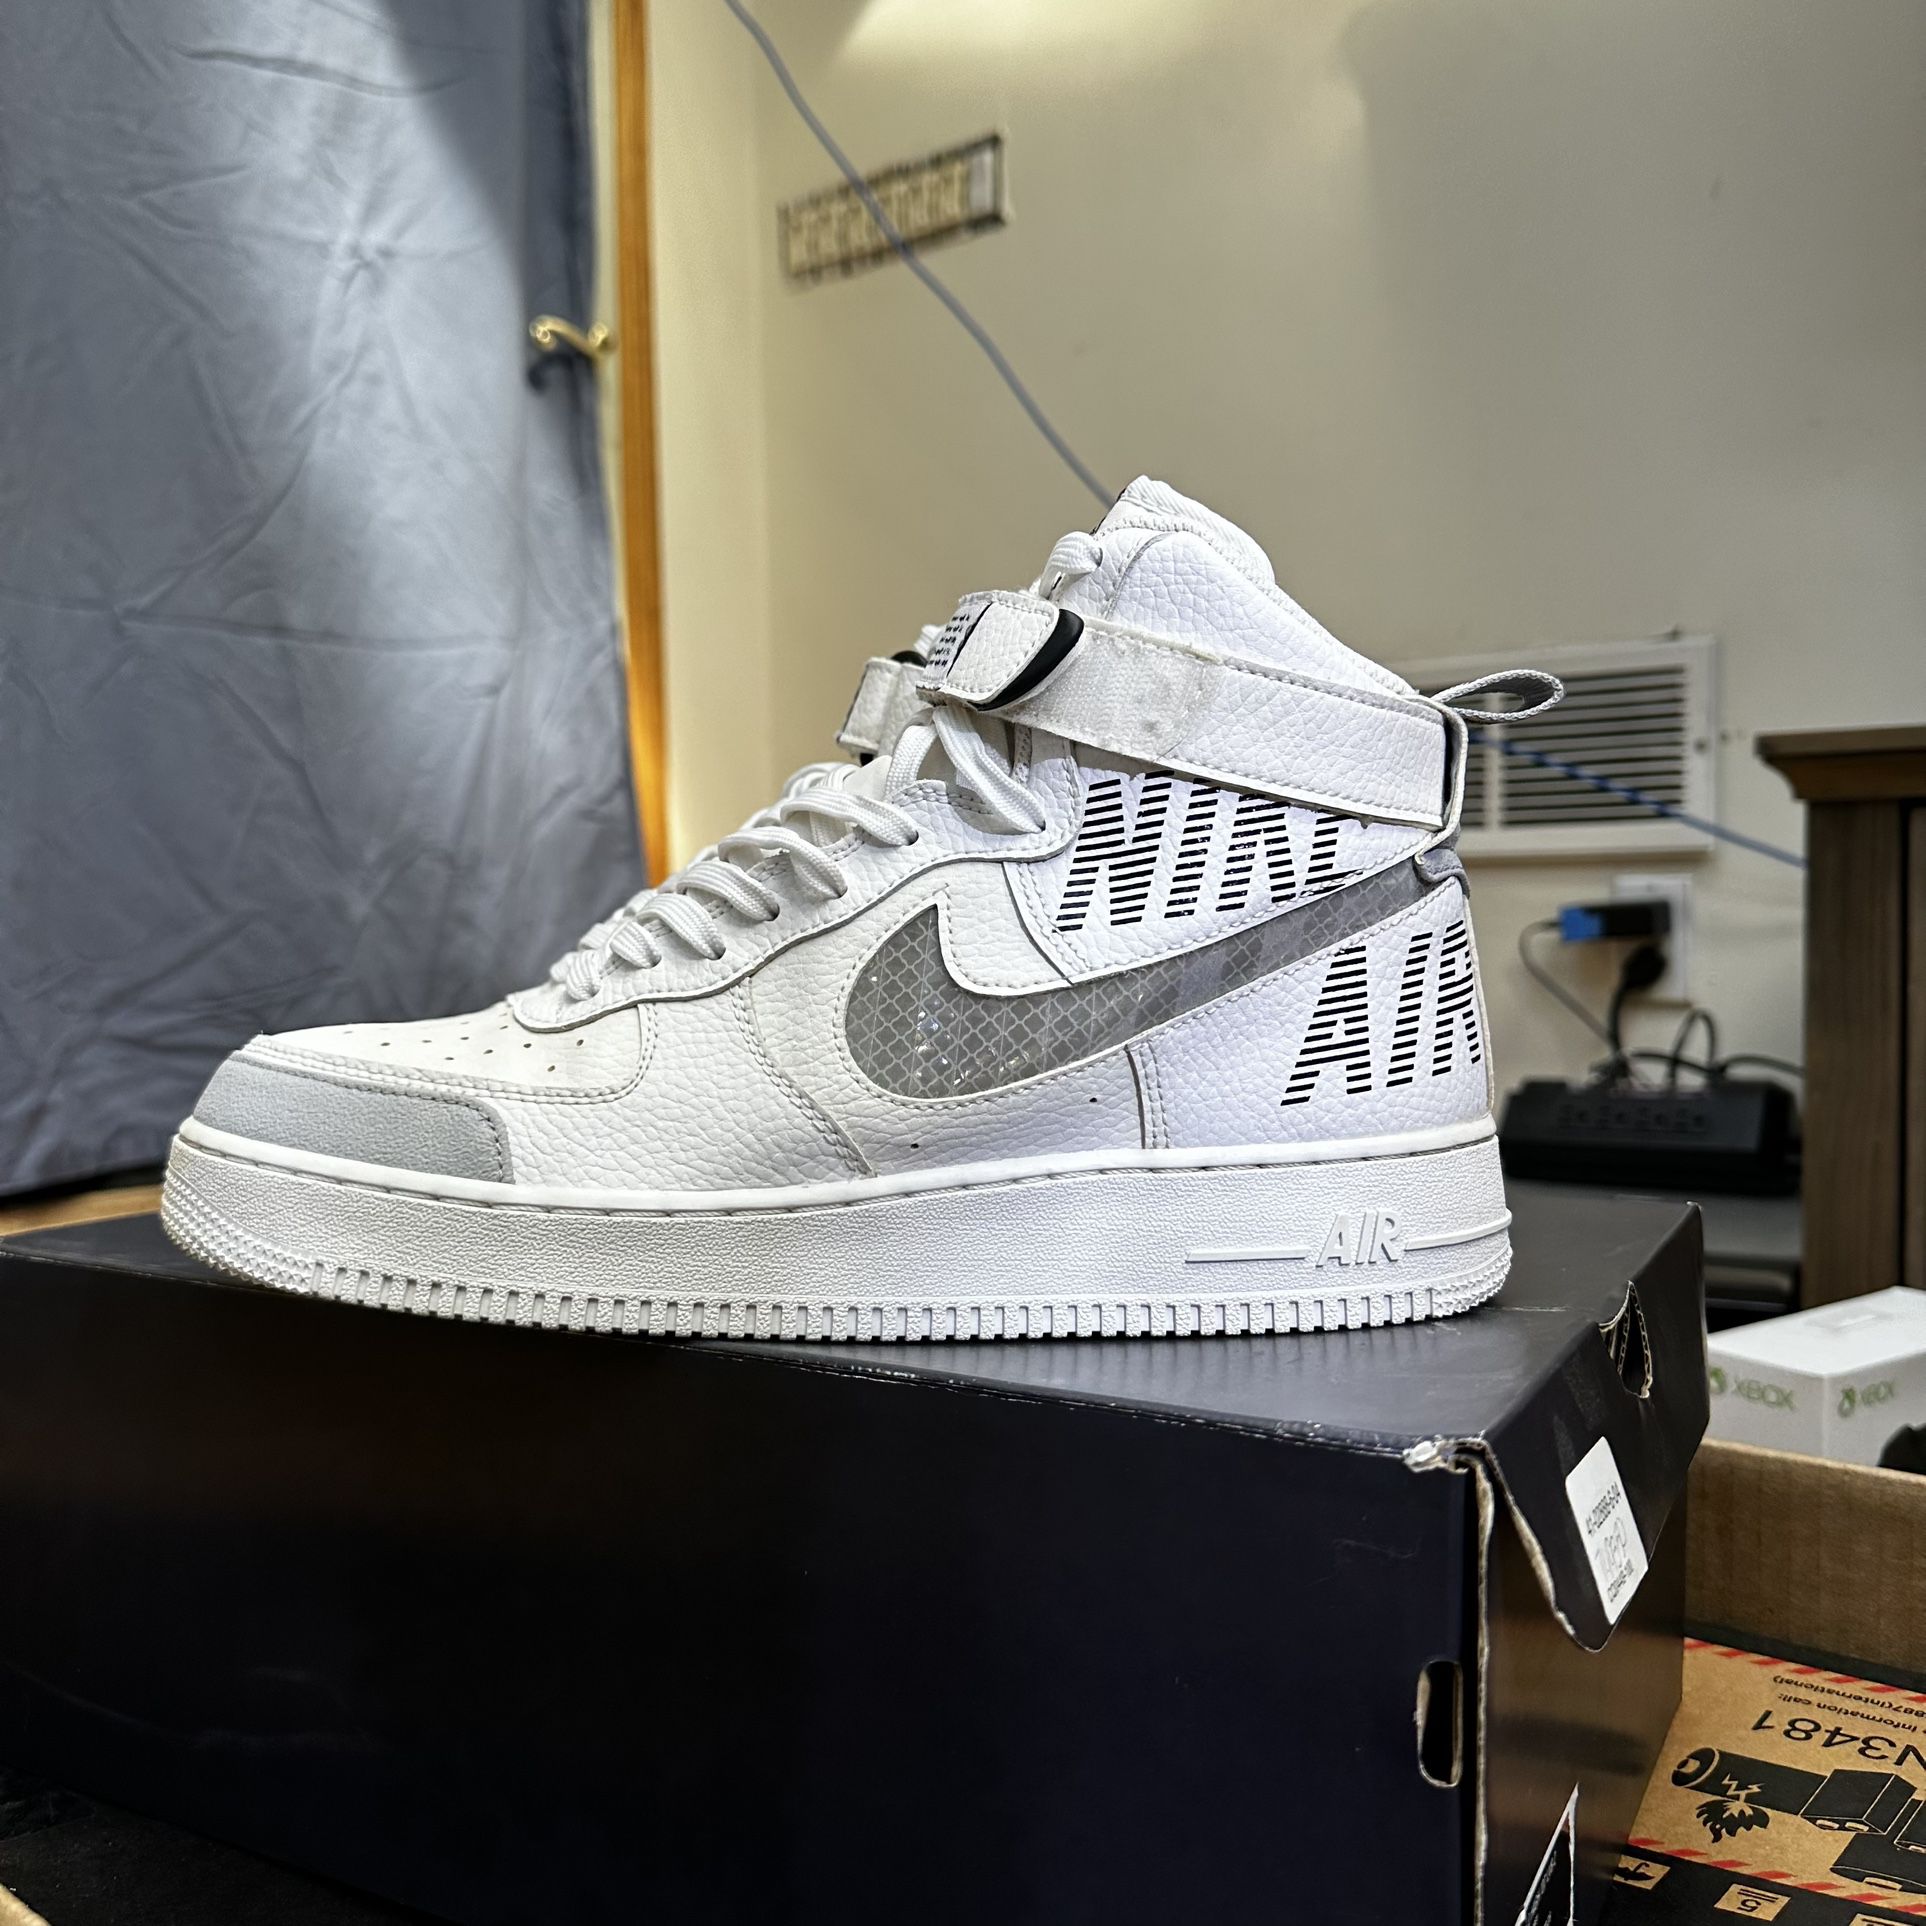 10 - Nike Air 1 High 'Under Construction' - White for Sale in Cresskill, NJ - OfferUp